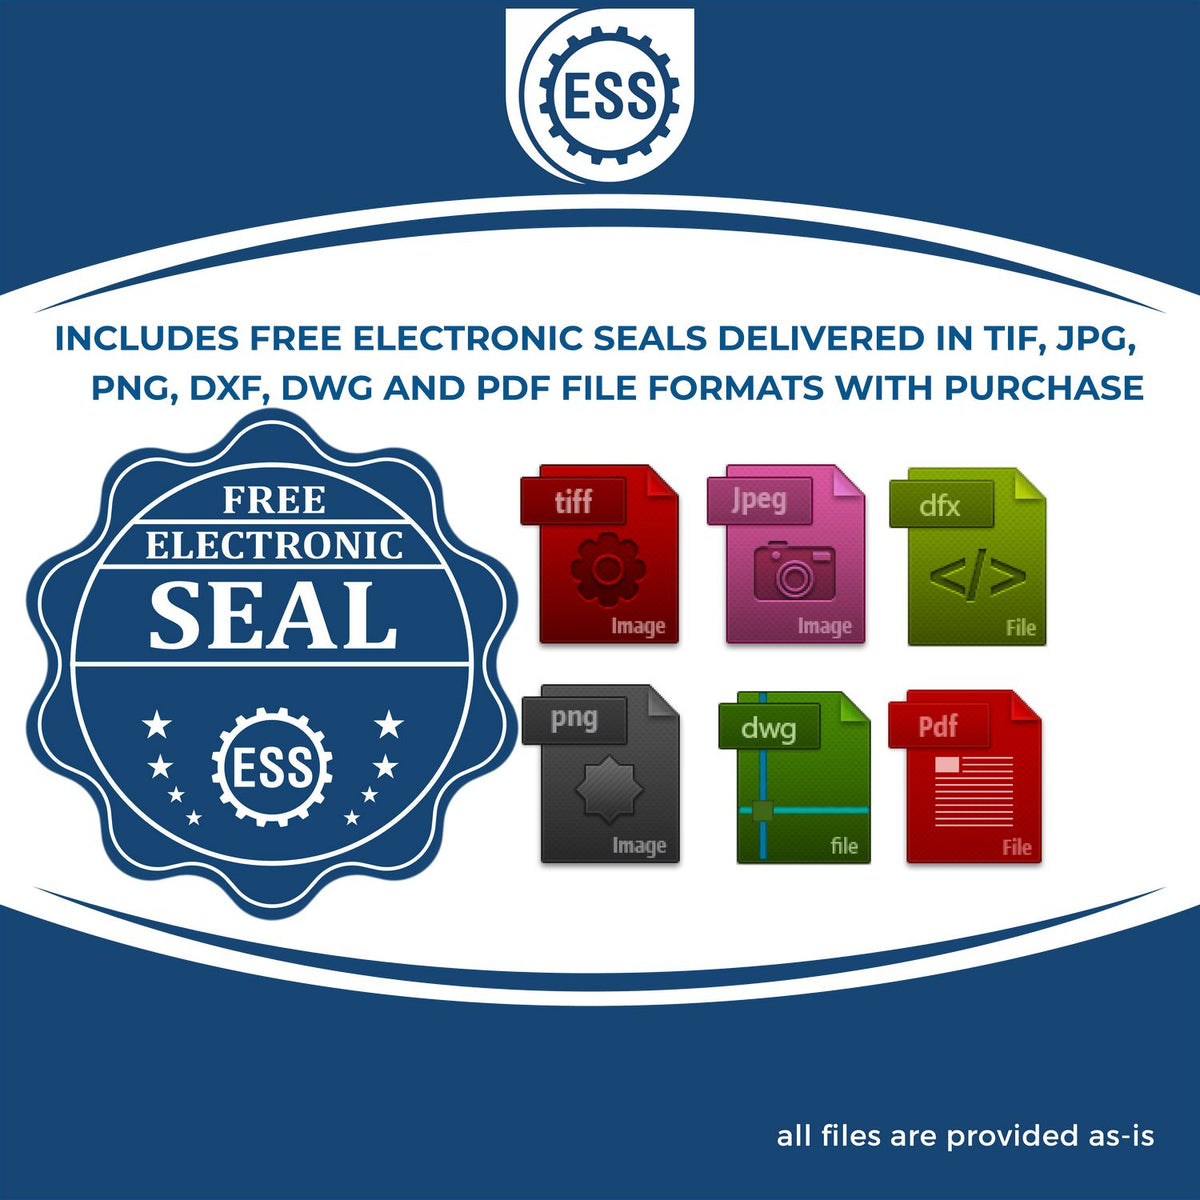 An infographic for the free electronic seal for the Long Reach Georgia Geology Seal illustrating the different file type icons such as DXF, DWG, TIF, JPG and PNG.